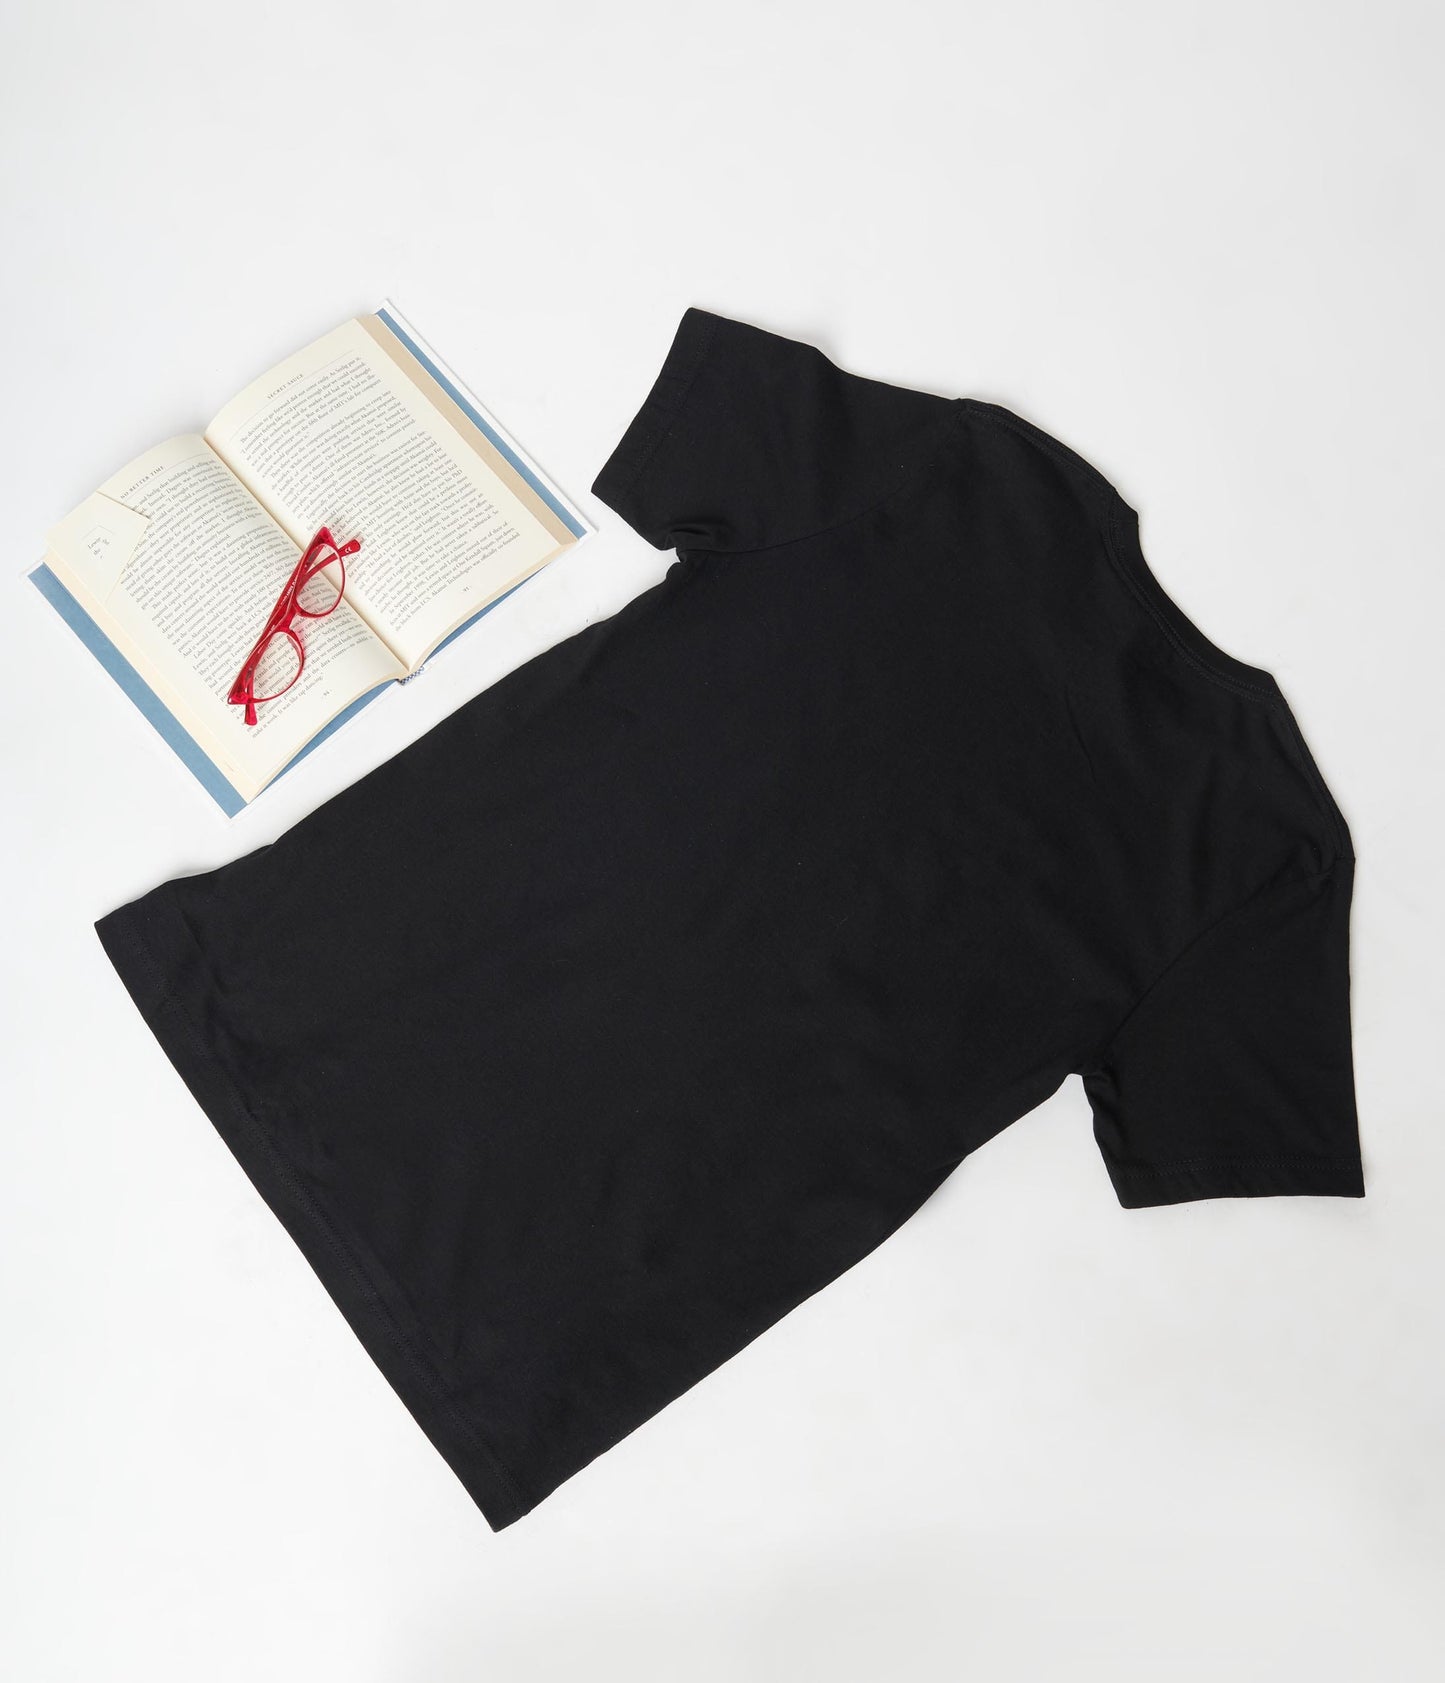 Black Banned Books Fitted Womens Graphic Tee